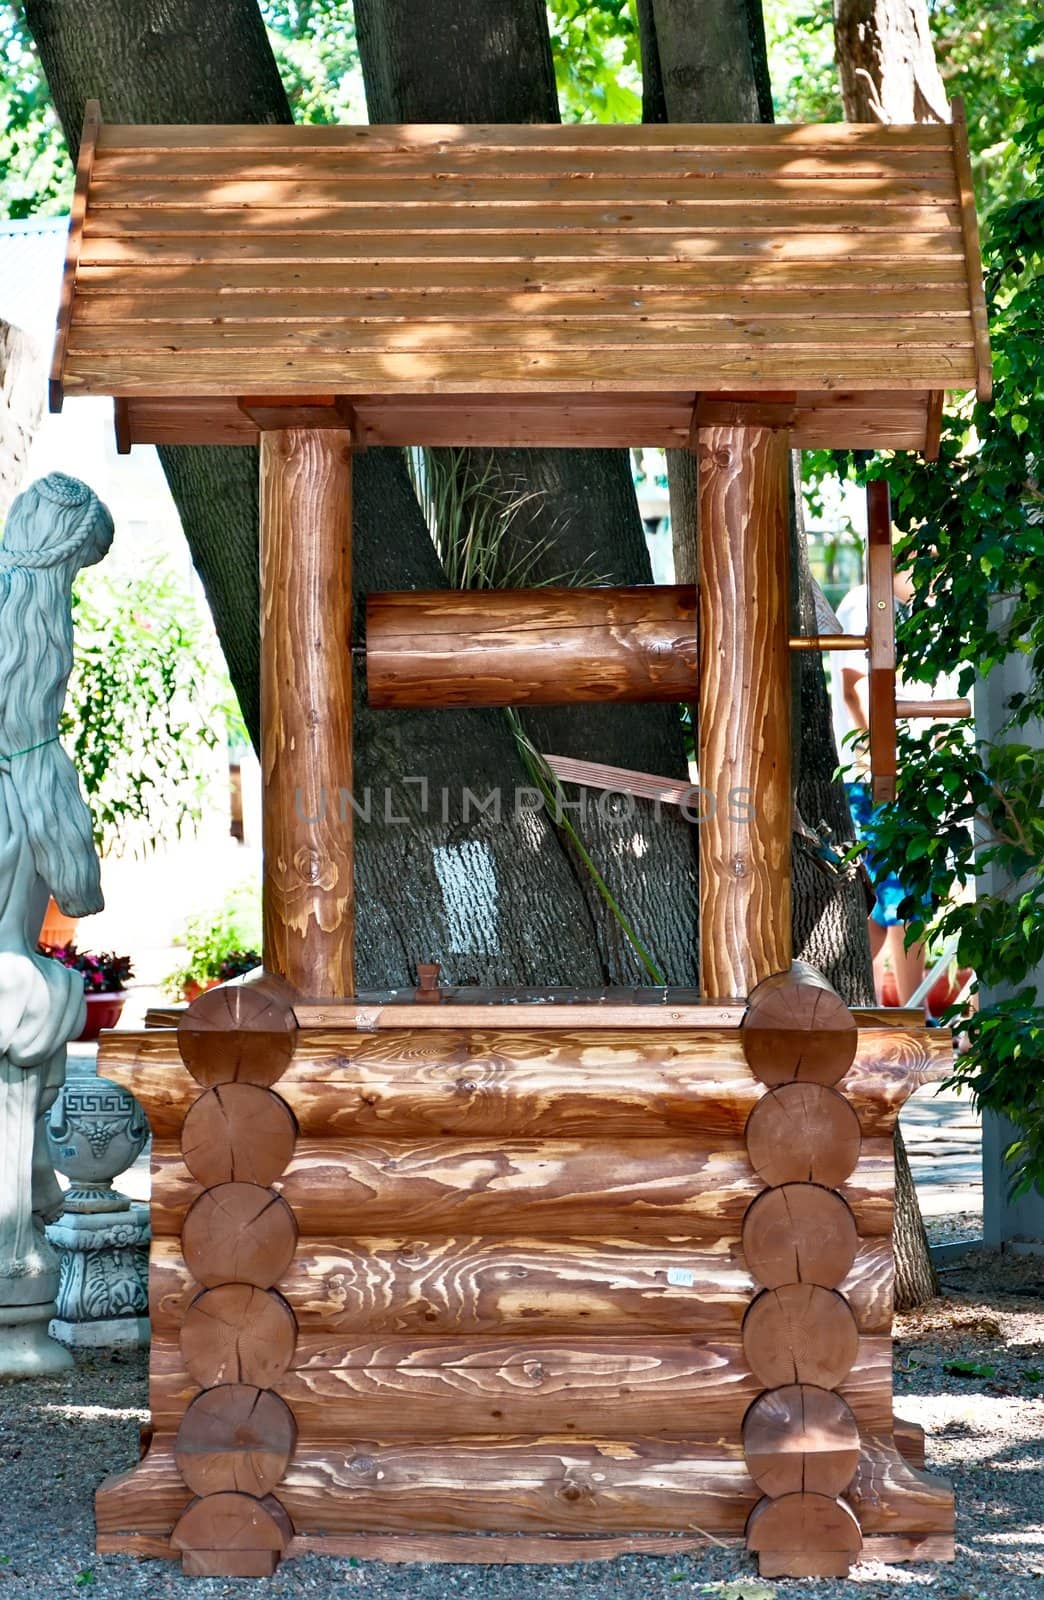 Decorative ornament for park - Wooden well